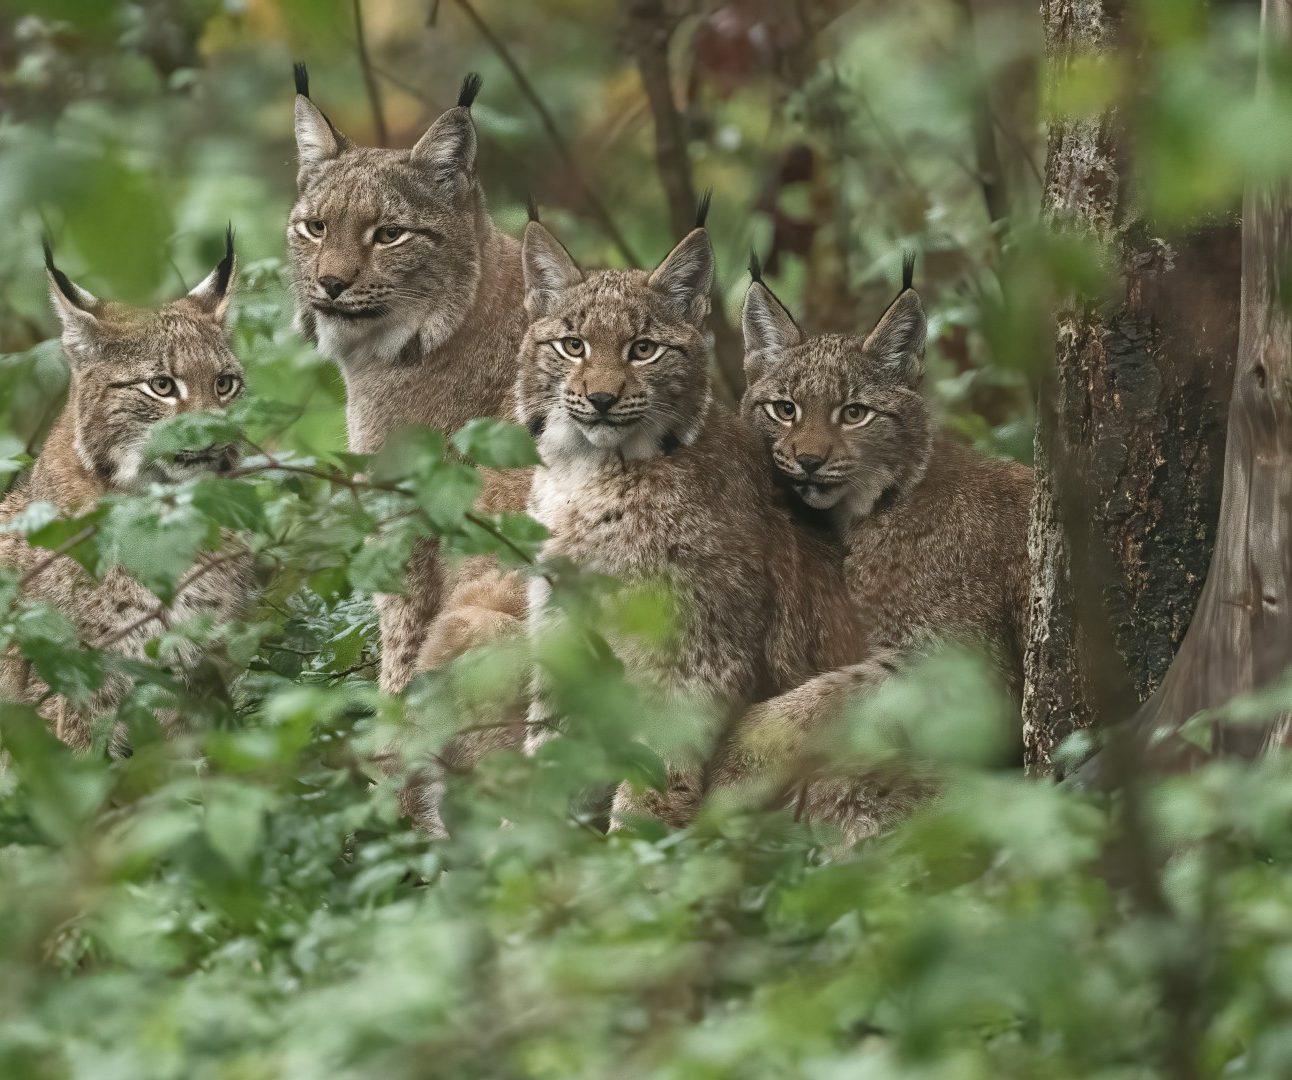 A group of Eurasian lynx sitting close together in a green leafy forest